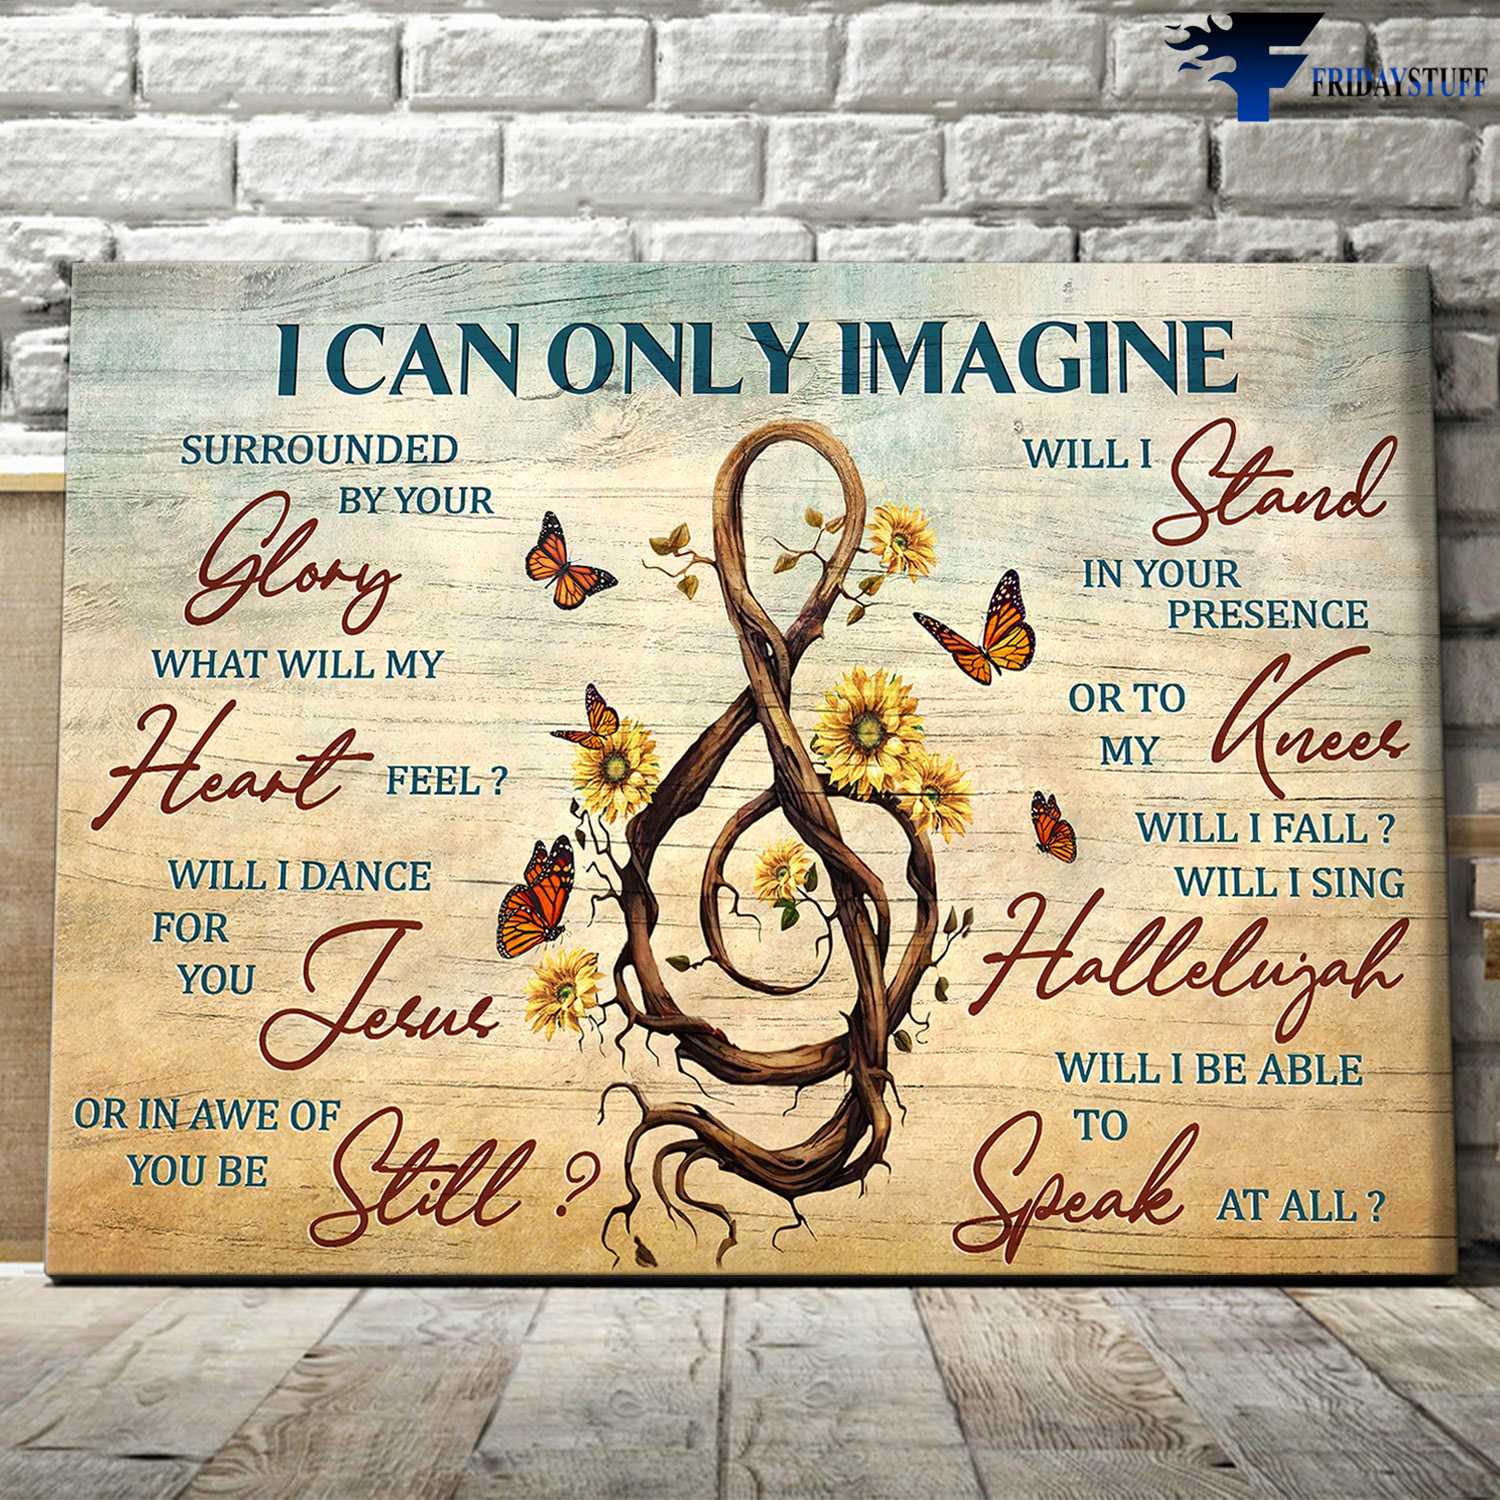 Music Life, Butterfly Flower - I Can Only Imagine, Surrounded By Your Glory, What Will My Heart Feel, Will I Dance For You Jesus